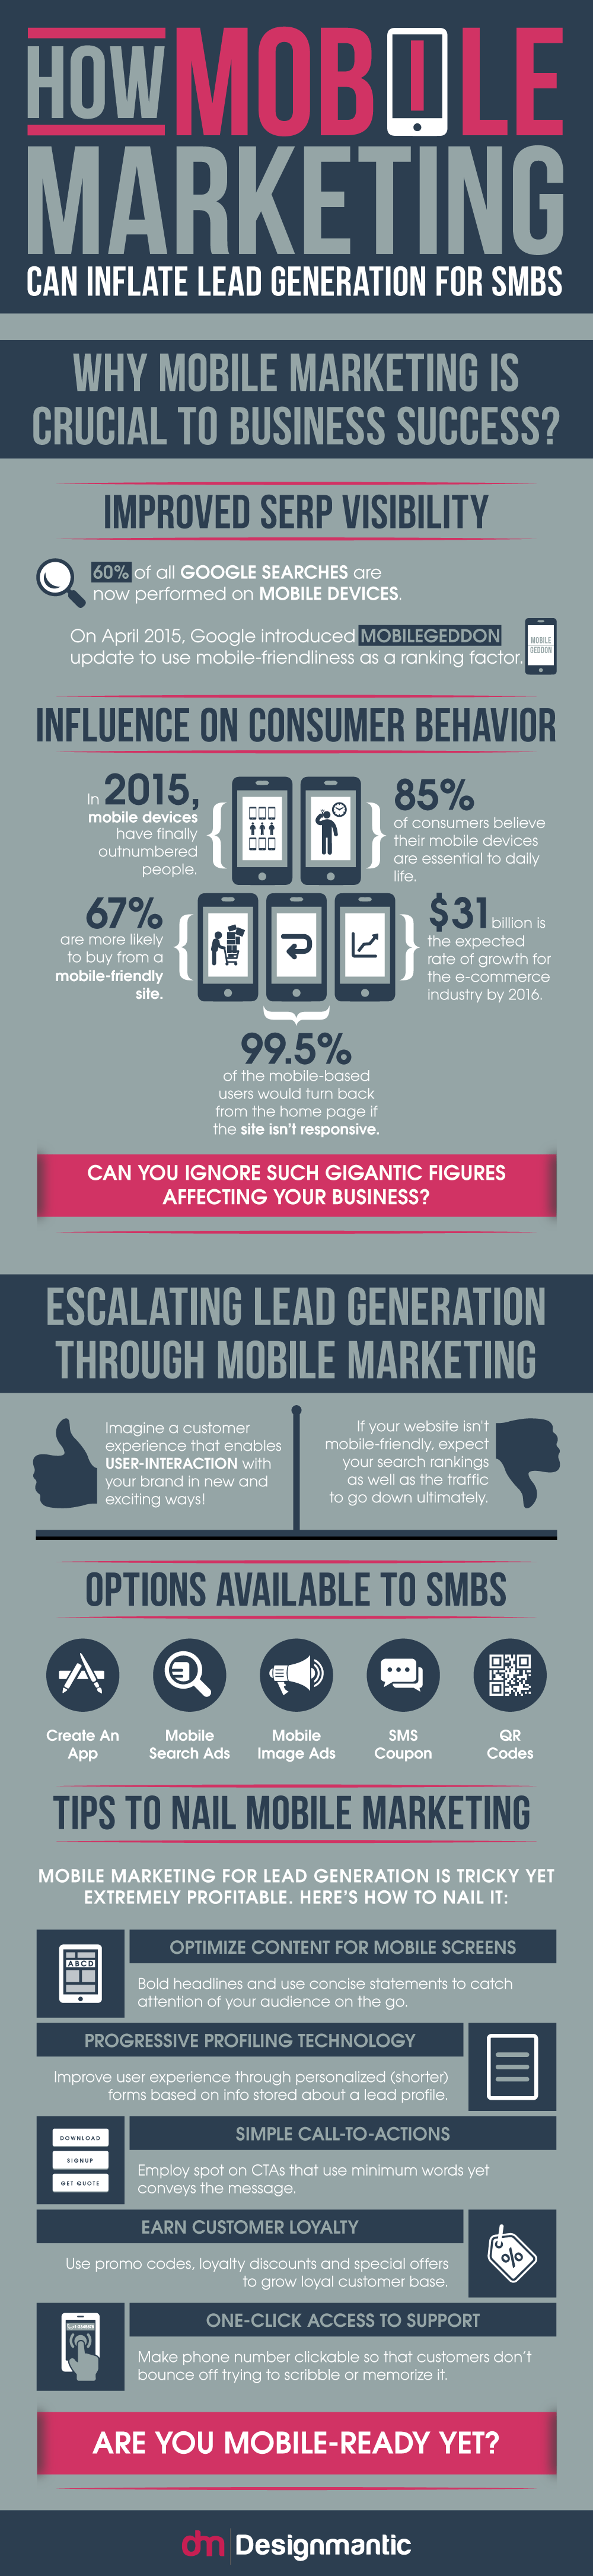 How Mobile Marketing Can Inflate Lead Generation for SMBs